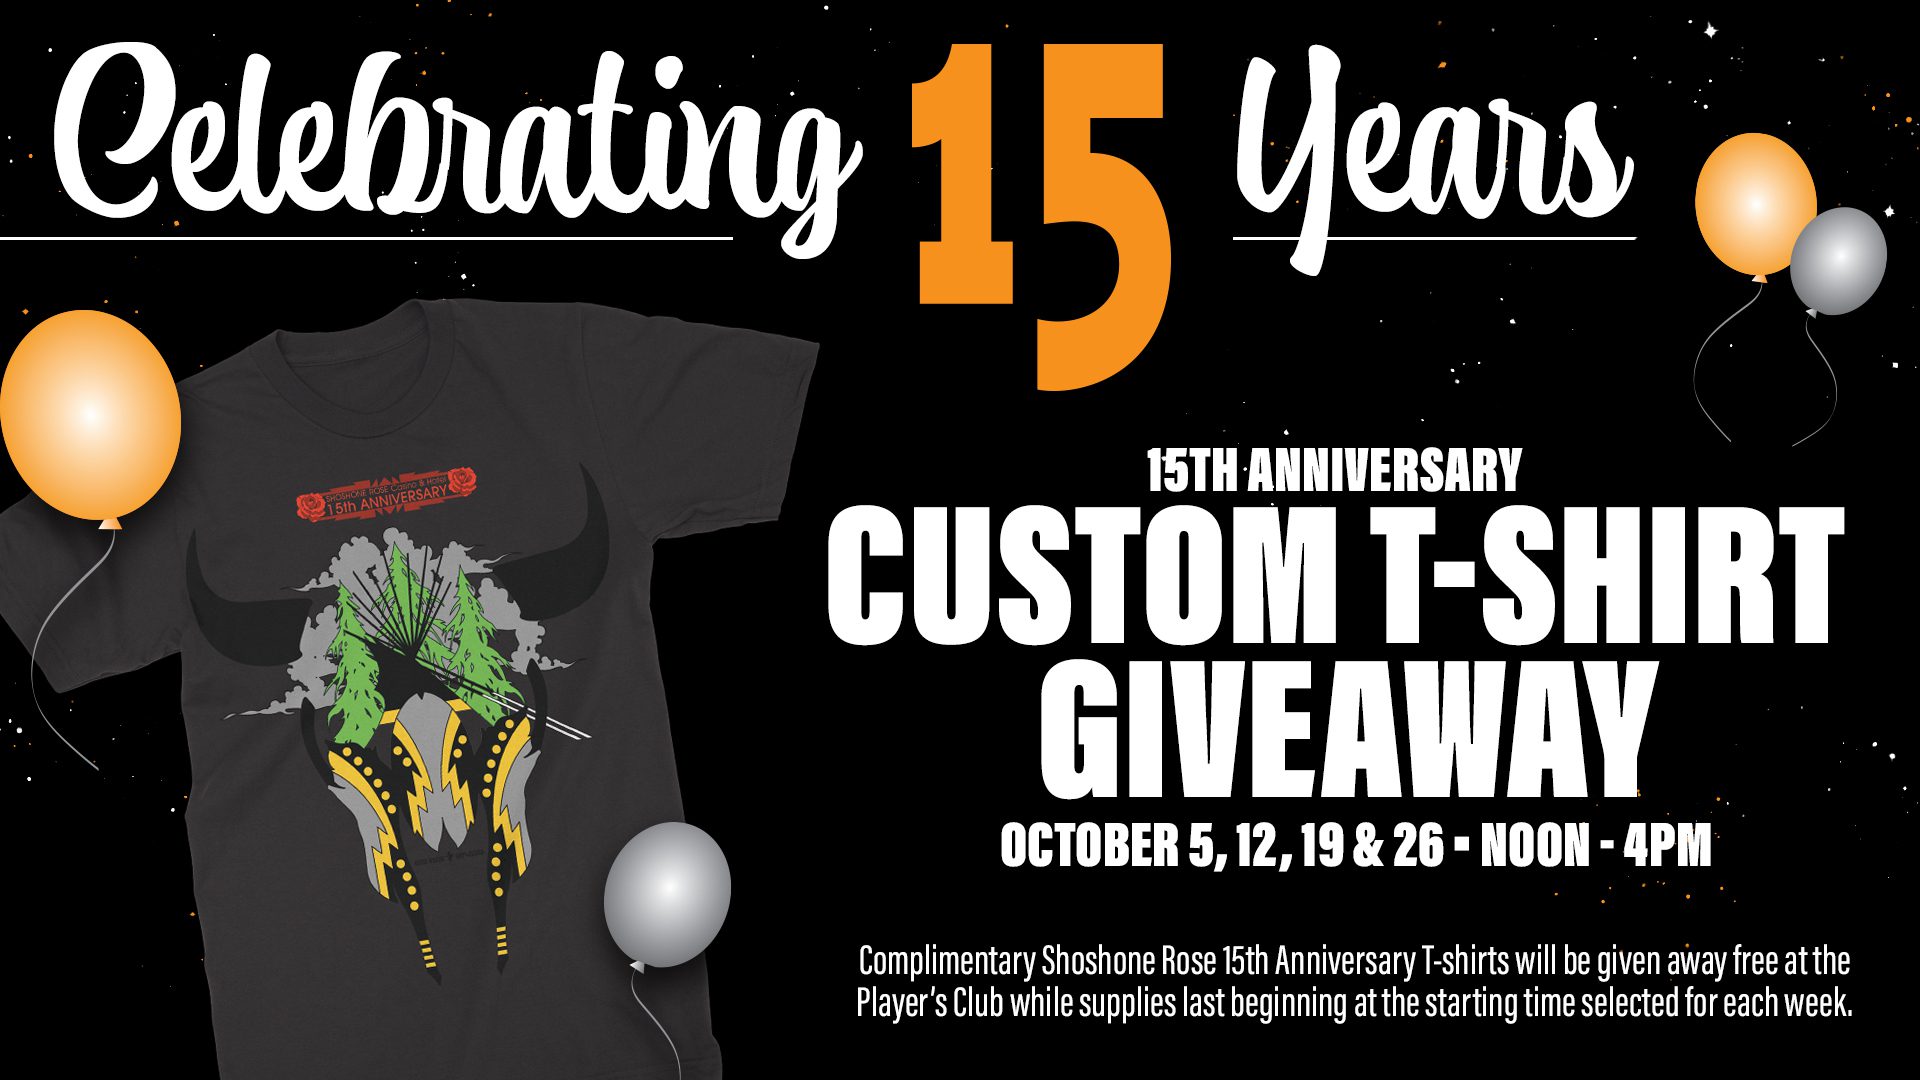 15th anniversary celebration with custom t-shirt giveaway event announcement.